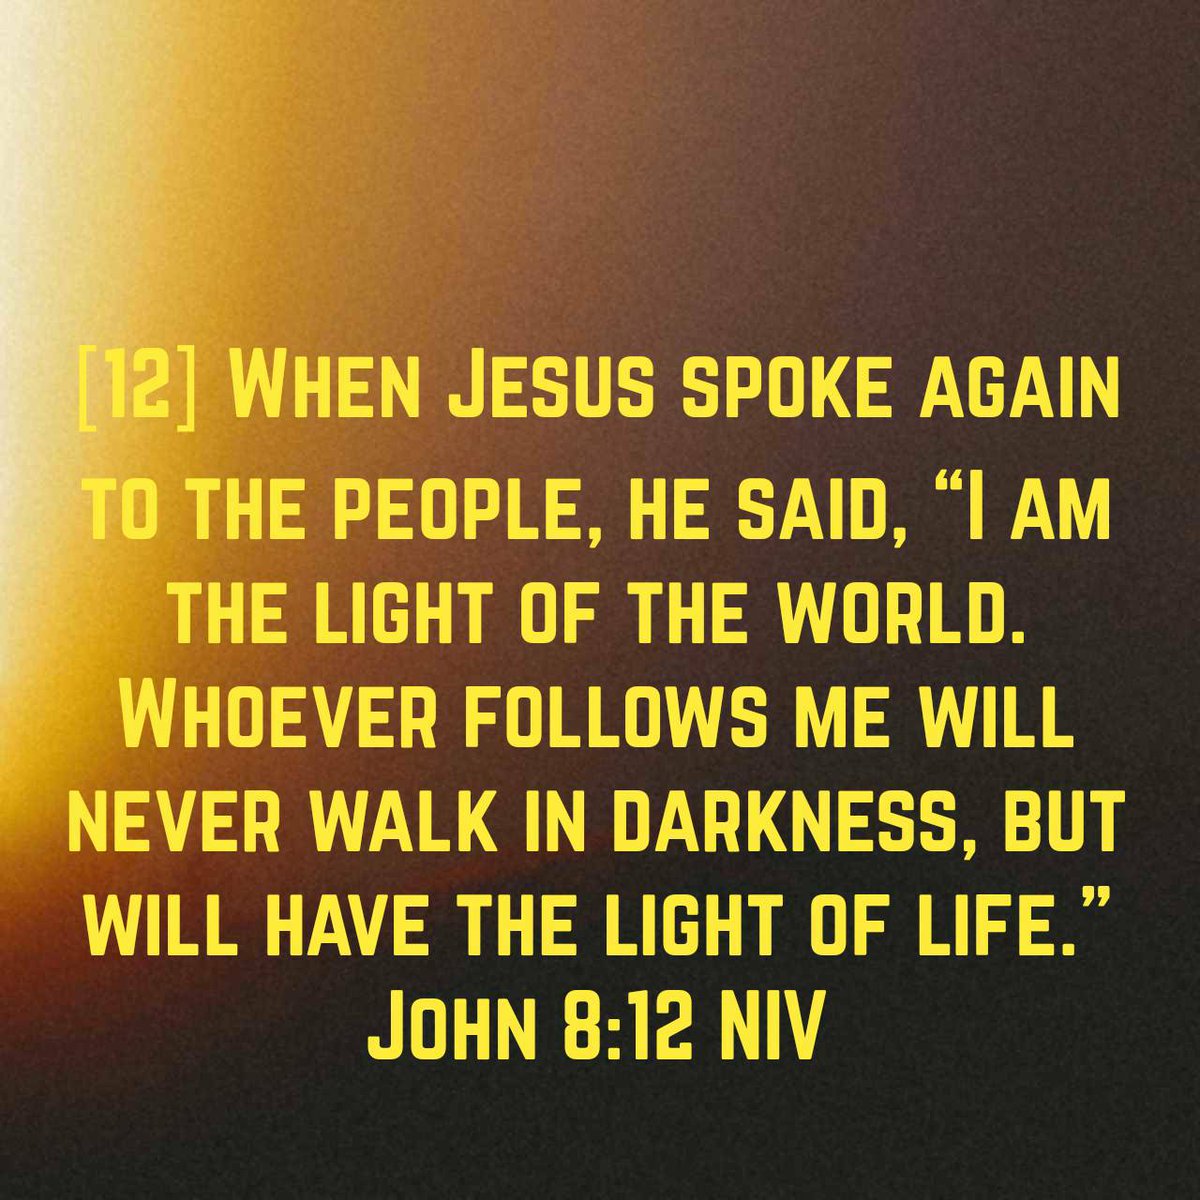 John 8:12 NIV [12] When Jesus spoke again to the people, he said, “I am the light of the world. Whoever follows me will never walk in darkness, but will have the light of life.” bible.com/bible/111/jhn.…